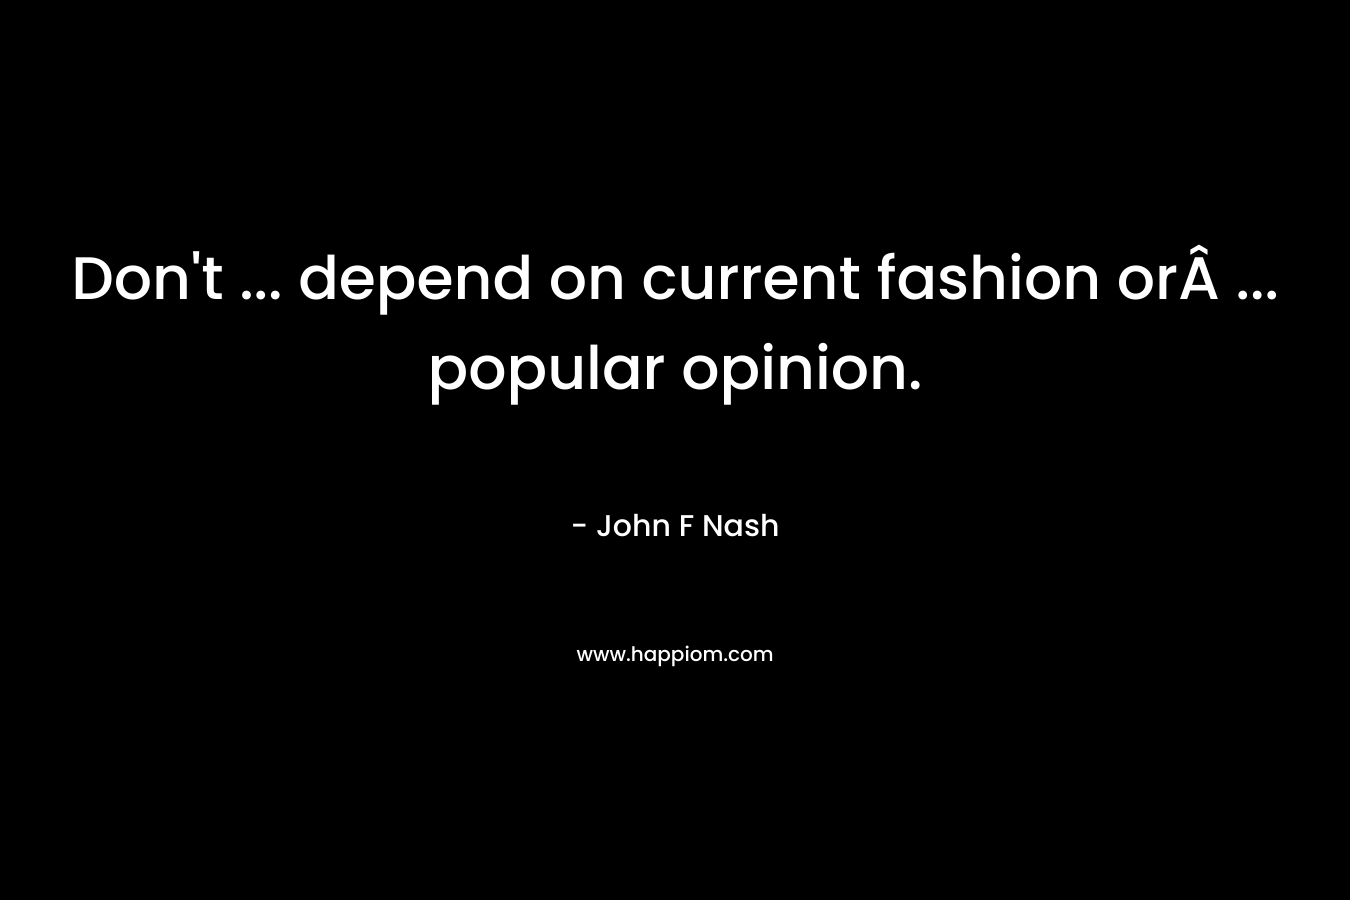 Don't ... depend on current fashion orÂ ... popular opinion.